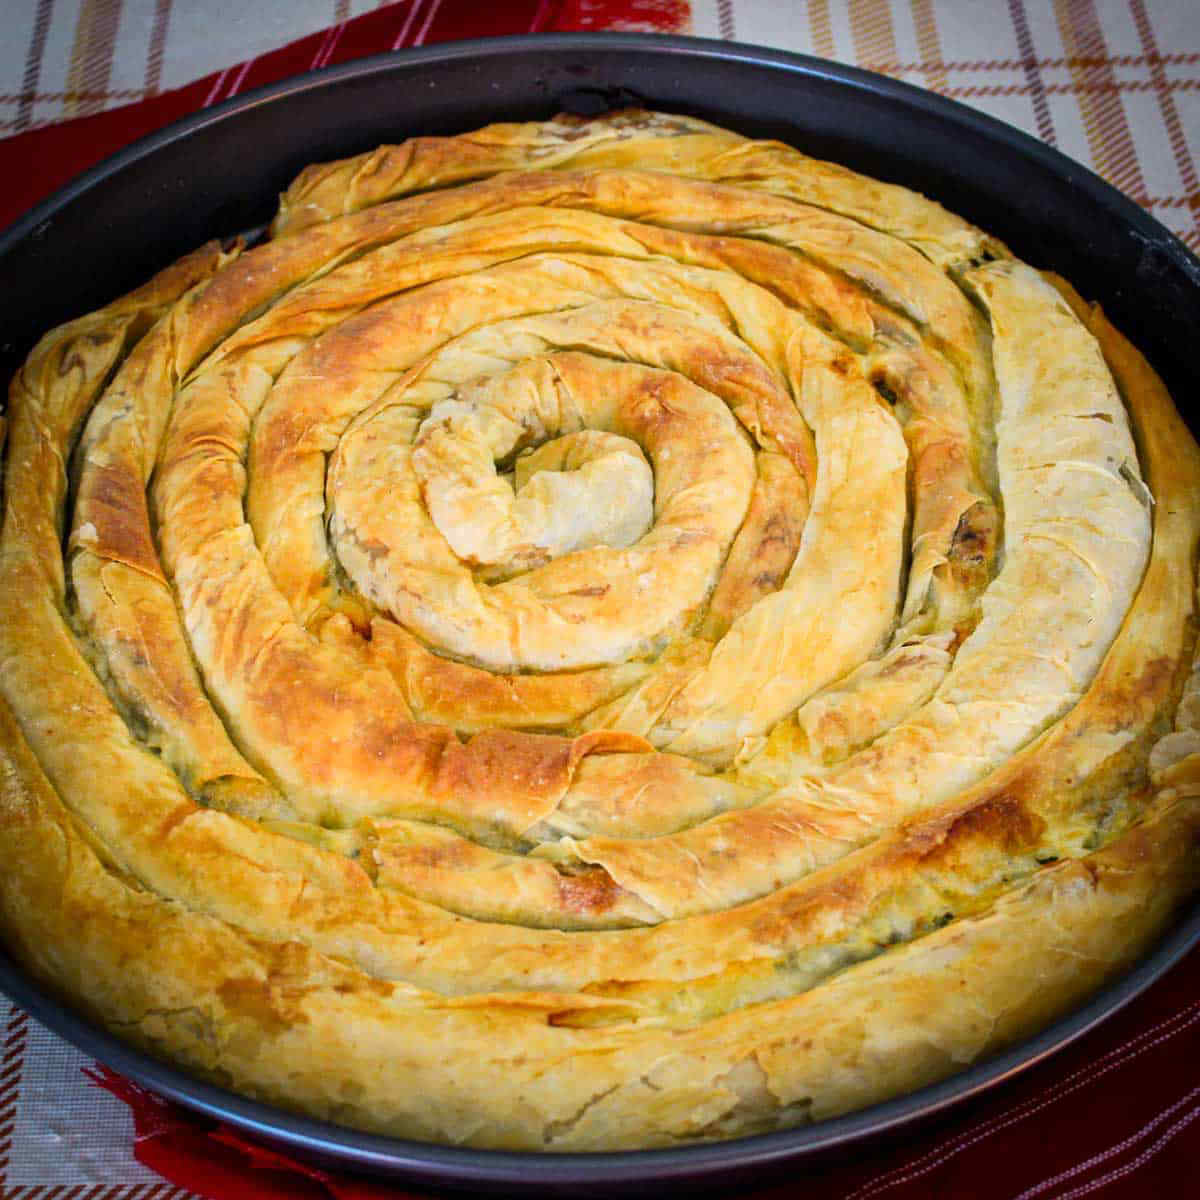 Phyllo Spinach and Feta Pie - Byrek me Spinaq